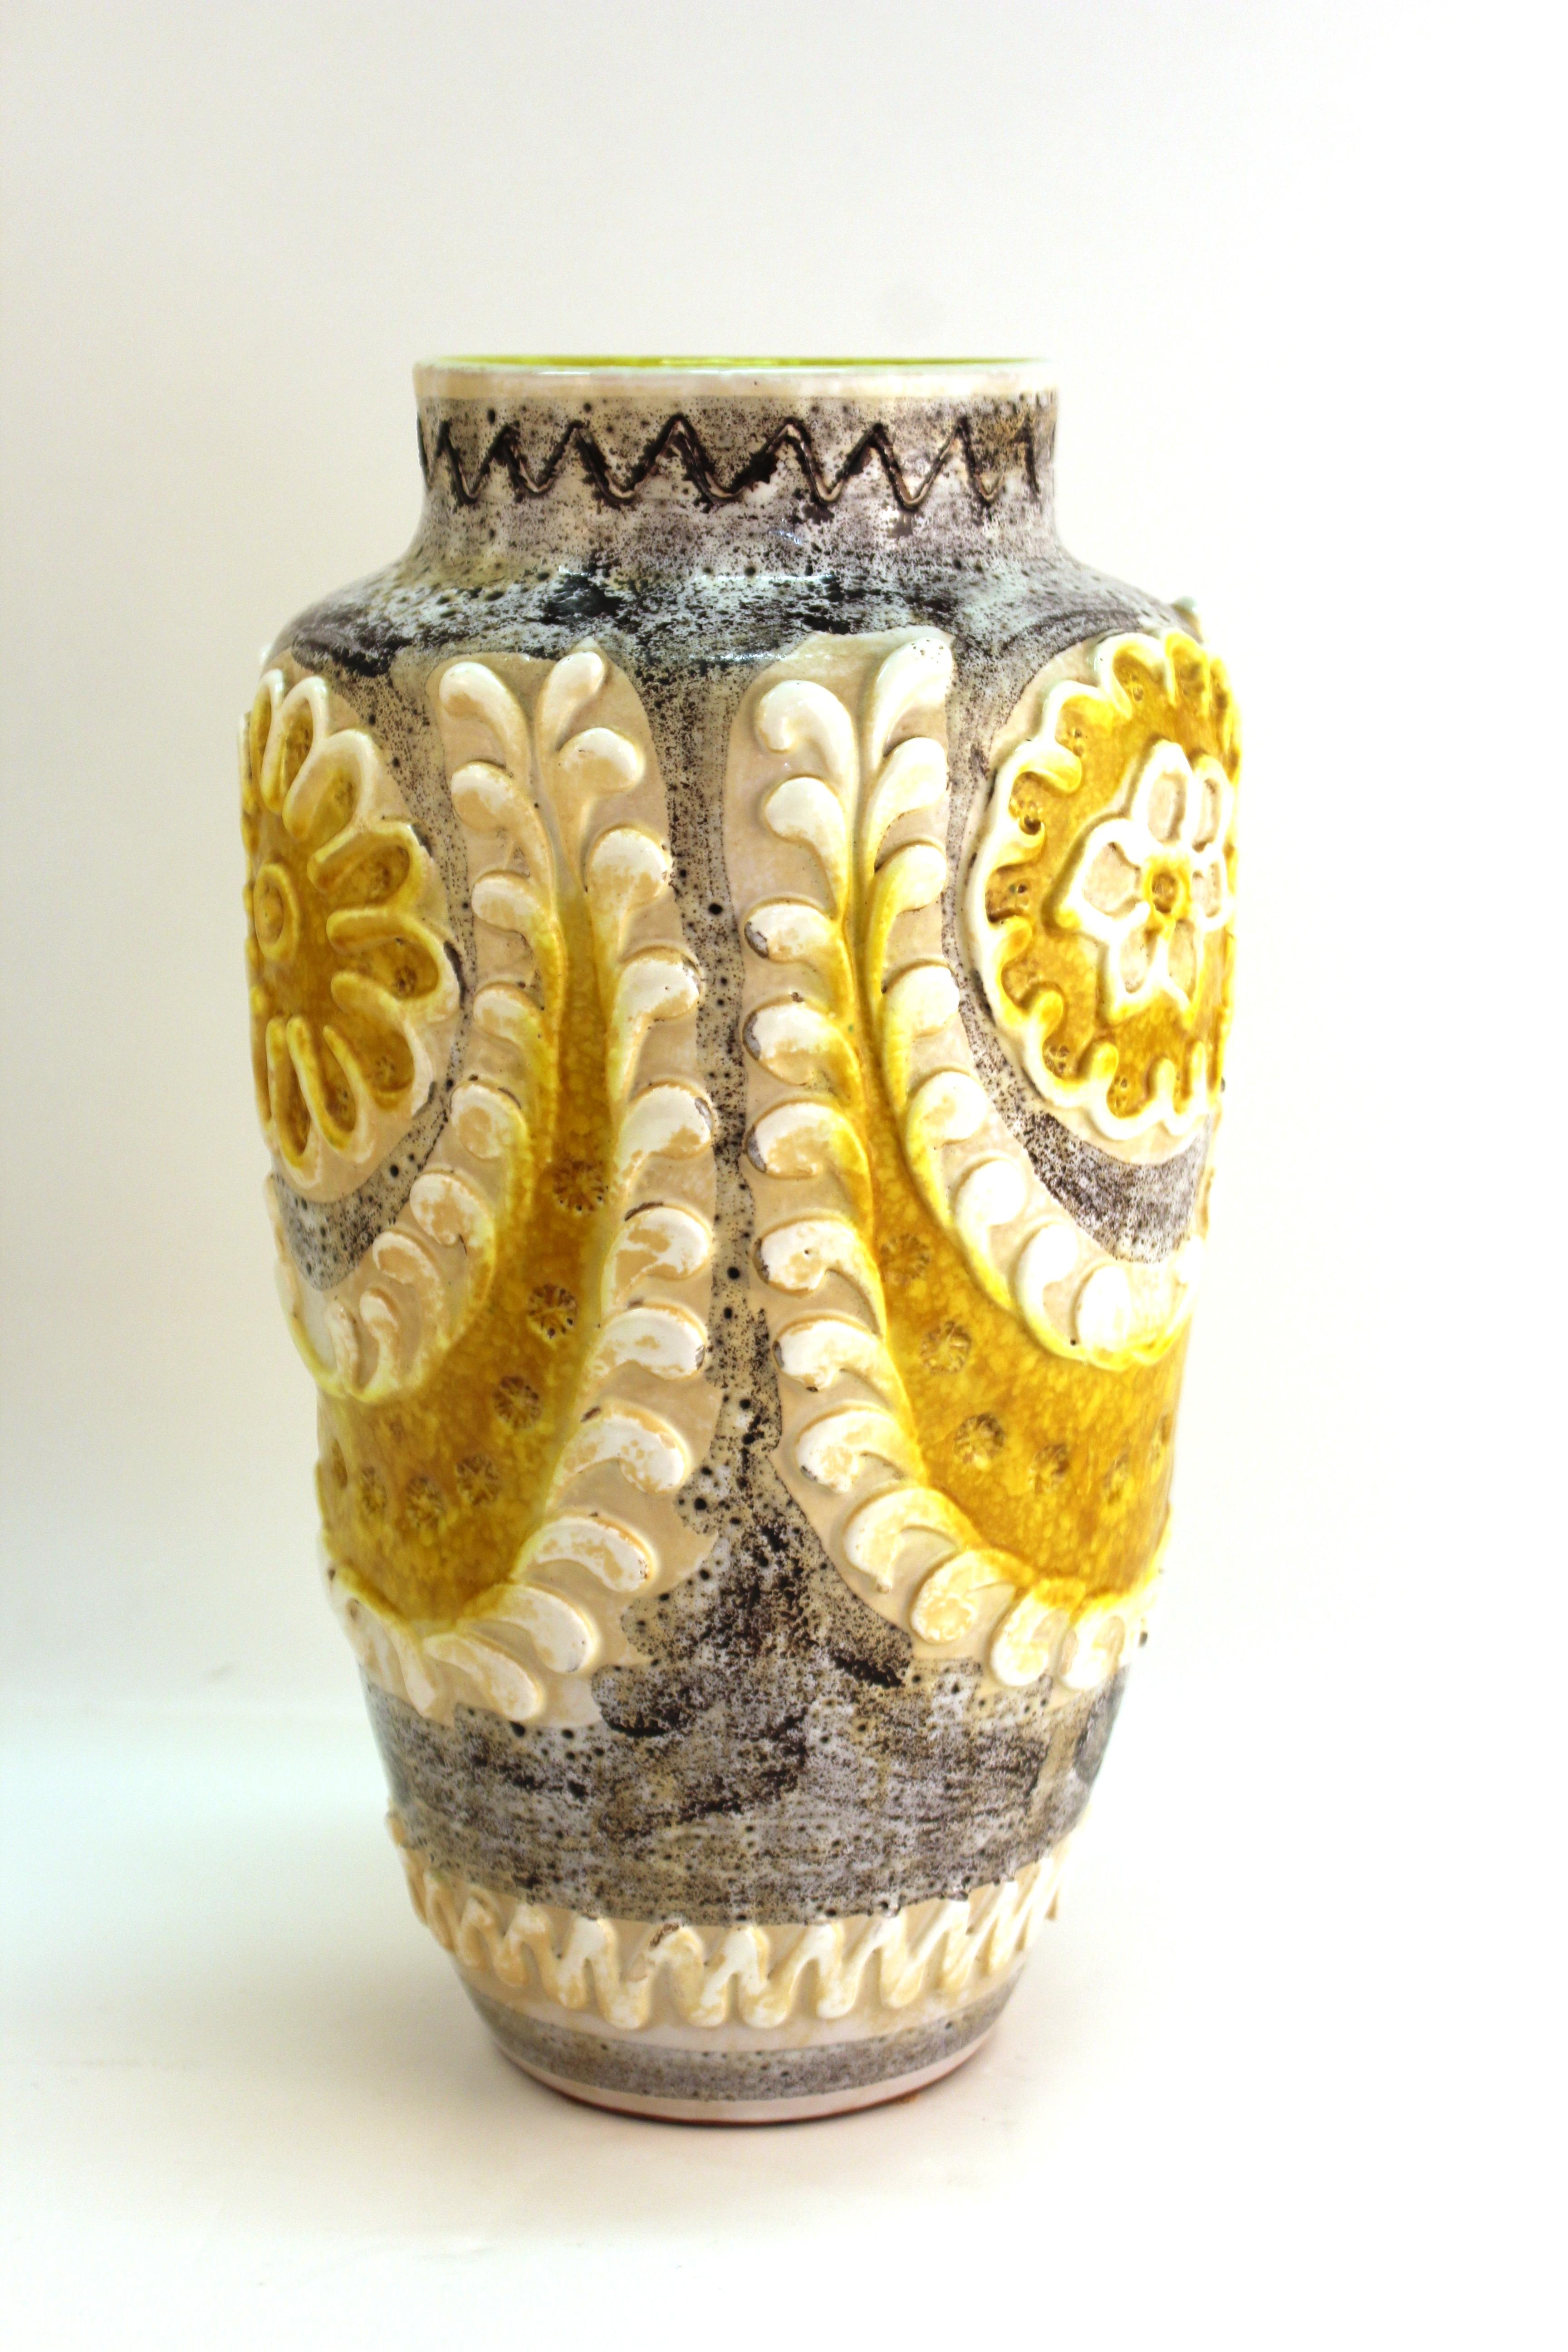 Mid-Century Modern pottery vase with floral decor and pastillage relief. The piece is marked 'Italy' on the bottom. In great vintage condition with age-appropriate wear and use.